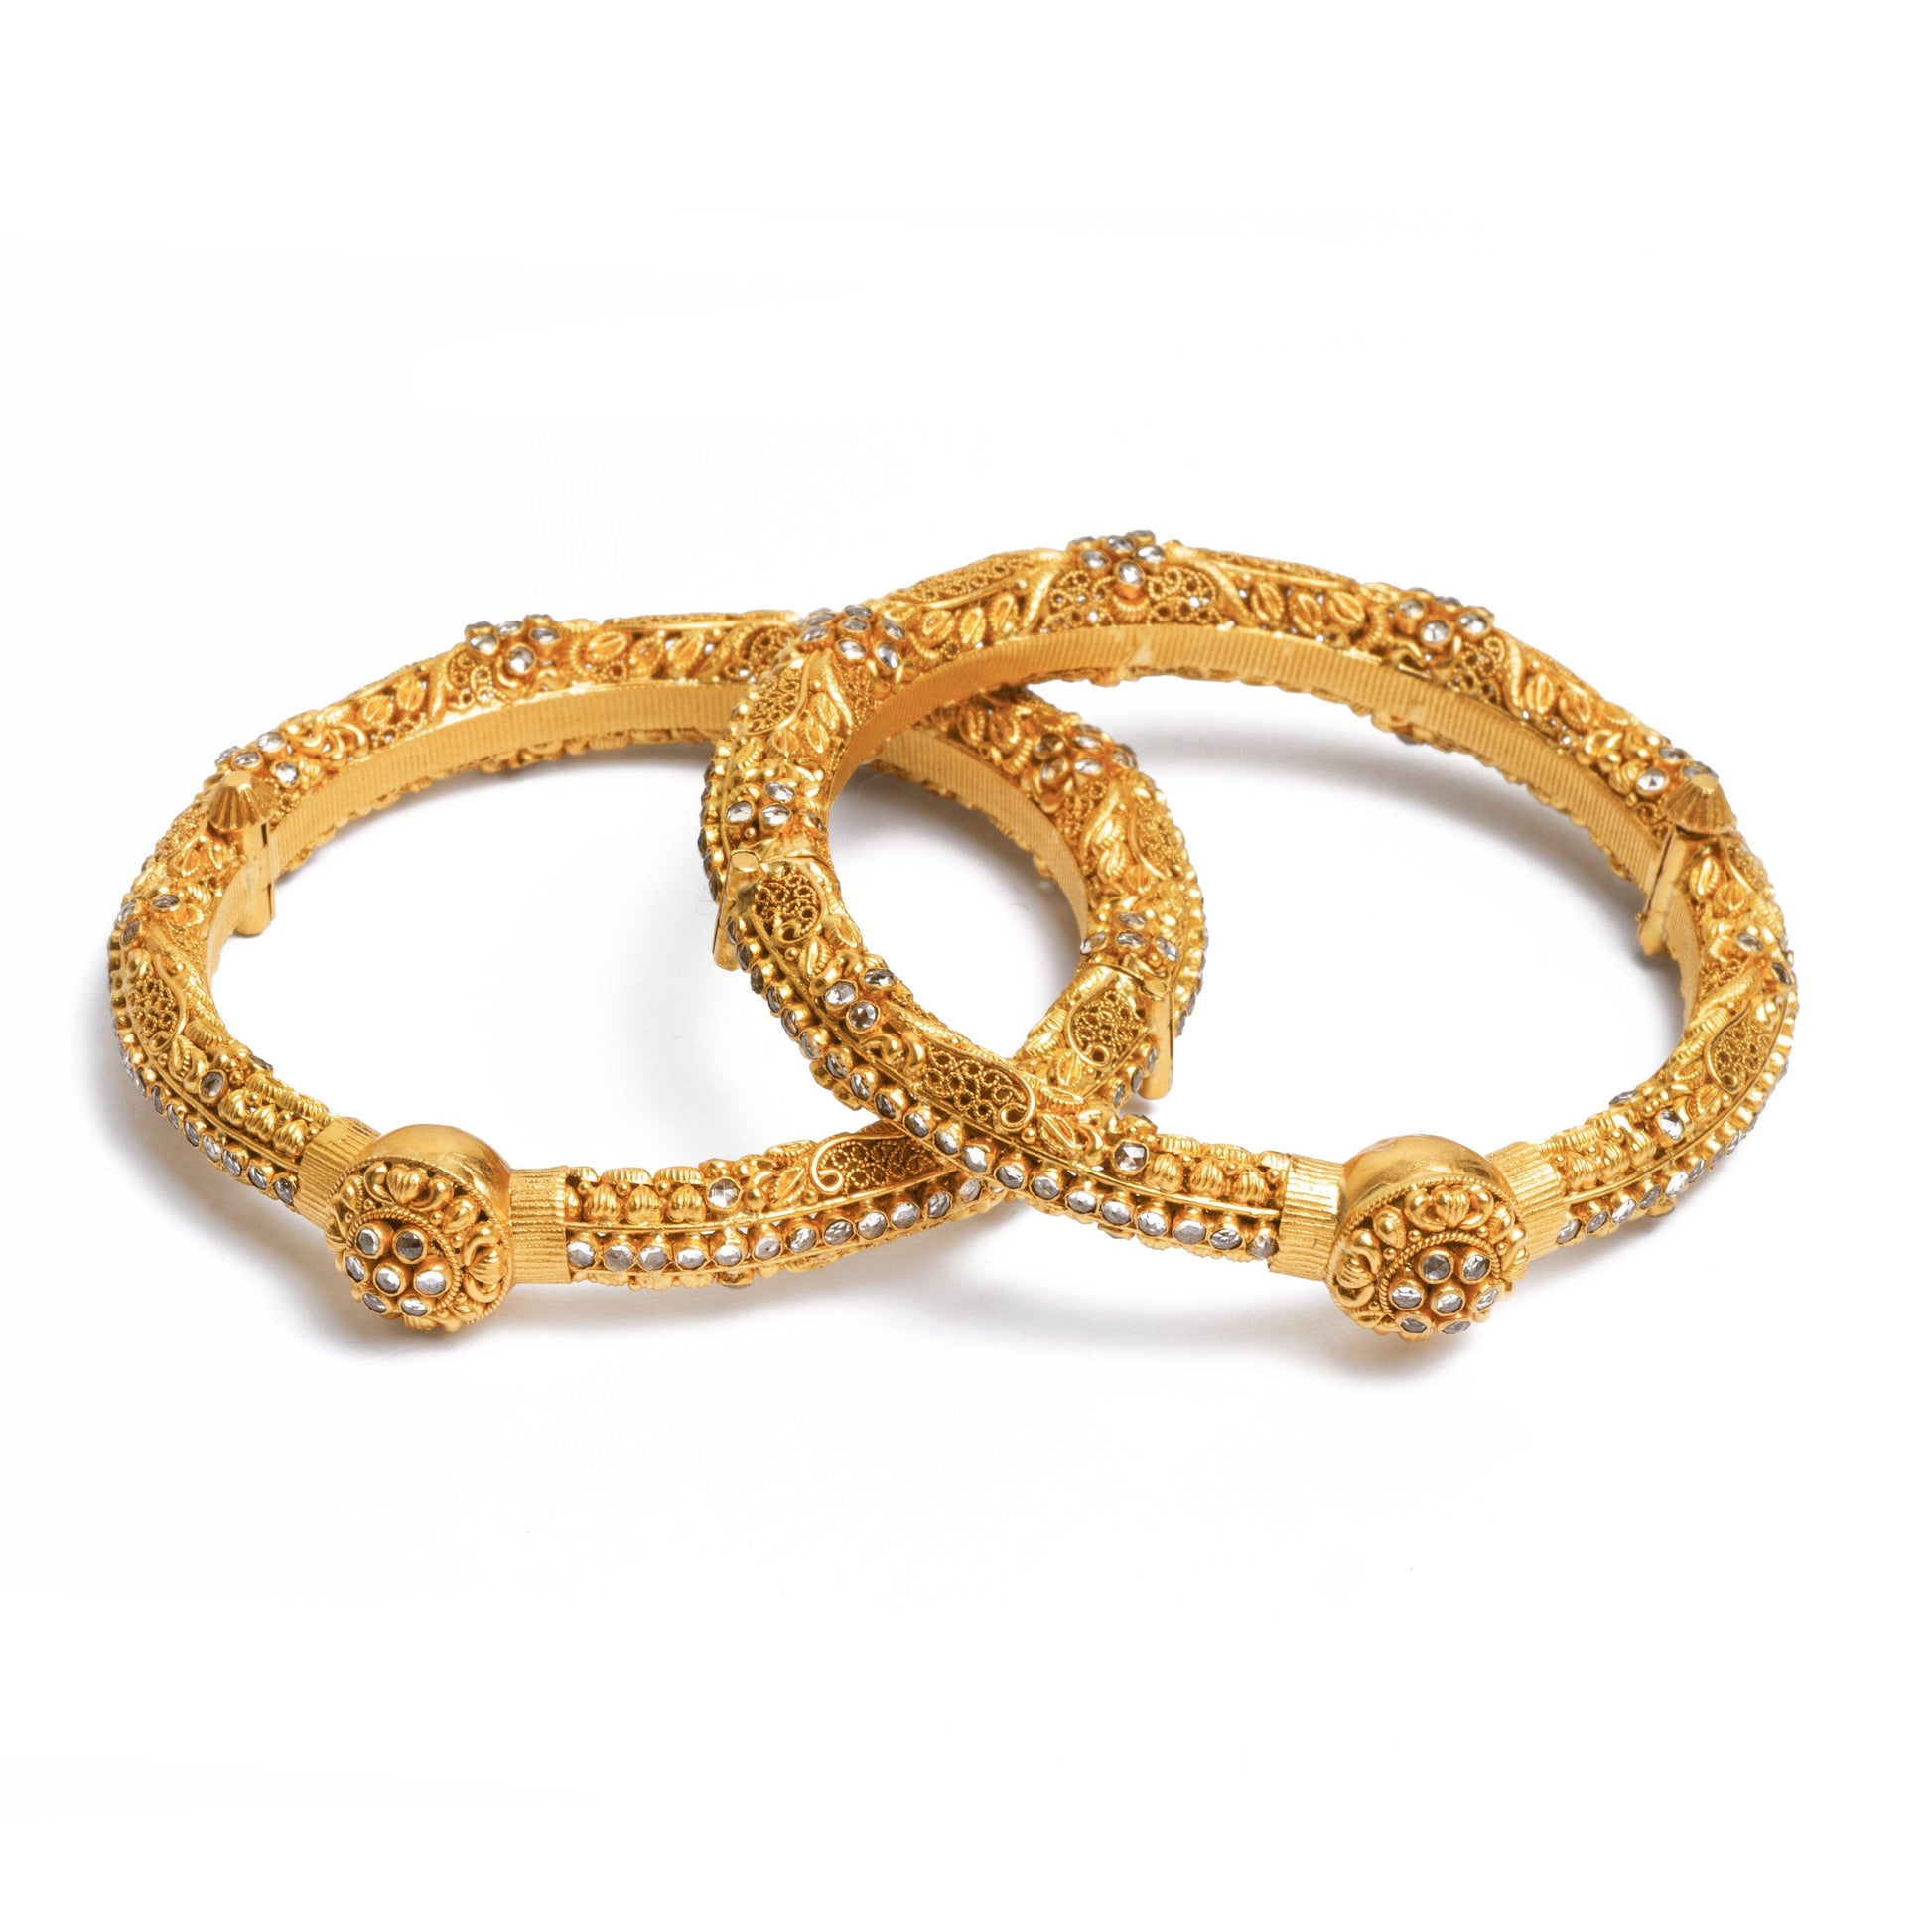 Pair of 22ct Gold Antiquated Look Openable Bangles with Polki Style Stones (71g) B-8277 - Minar Jewellers